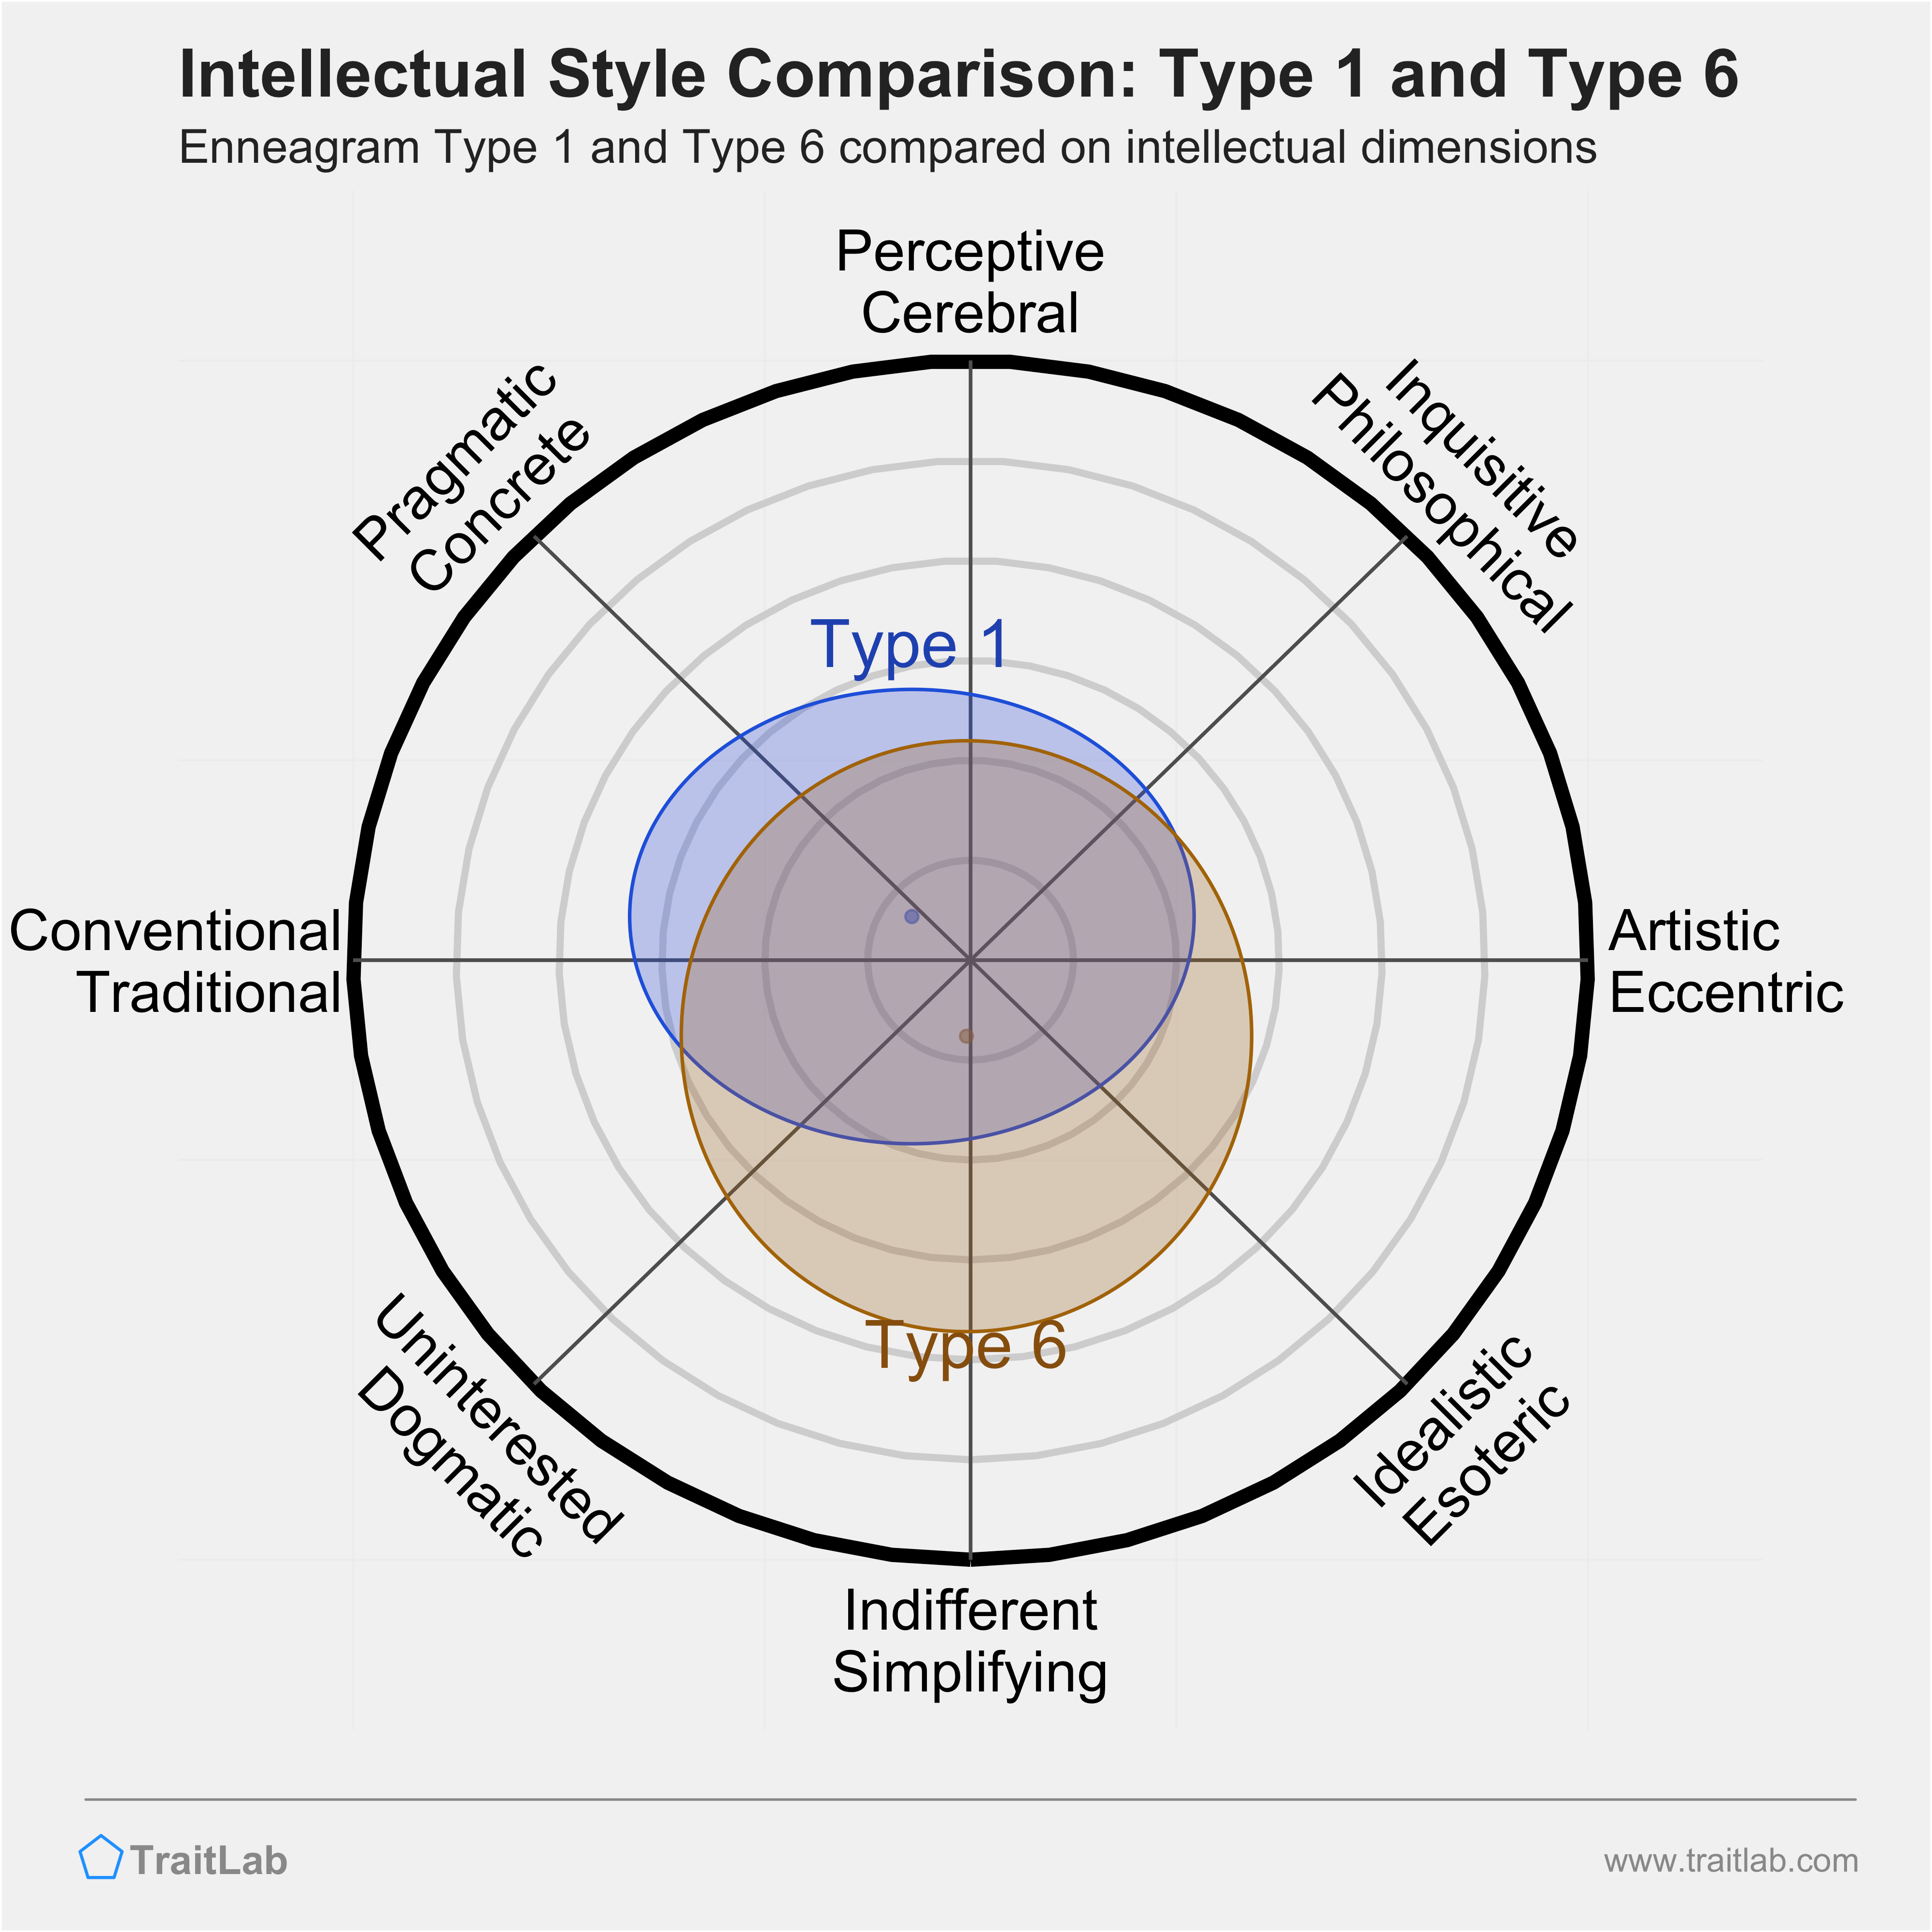 Type 1 and Type 6 comparison across intellectual dimensions